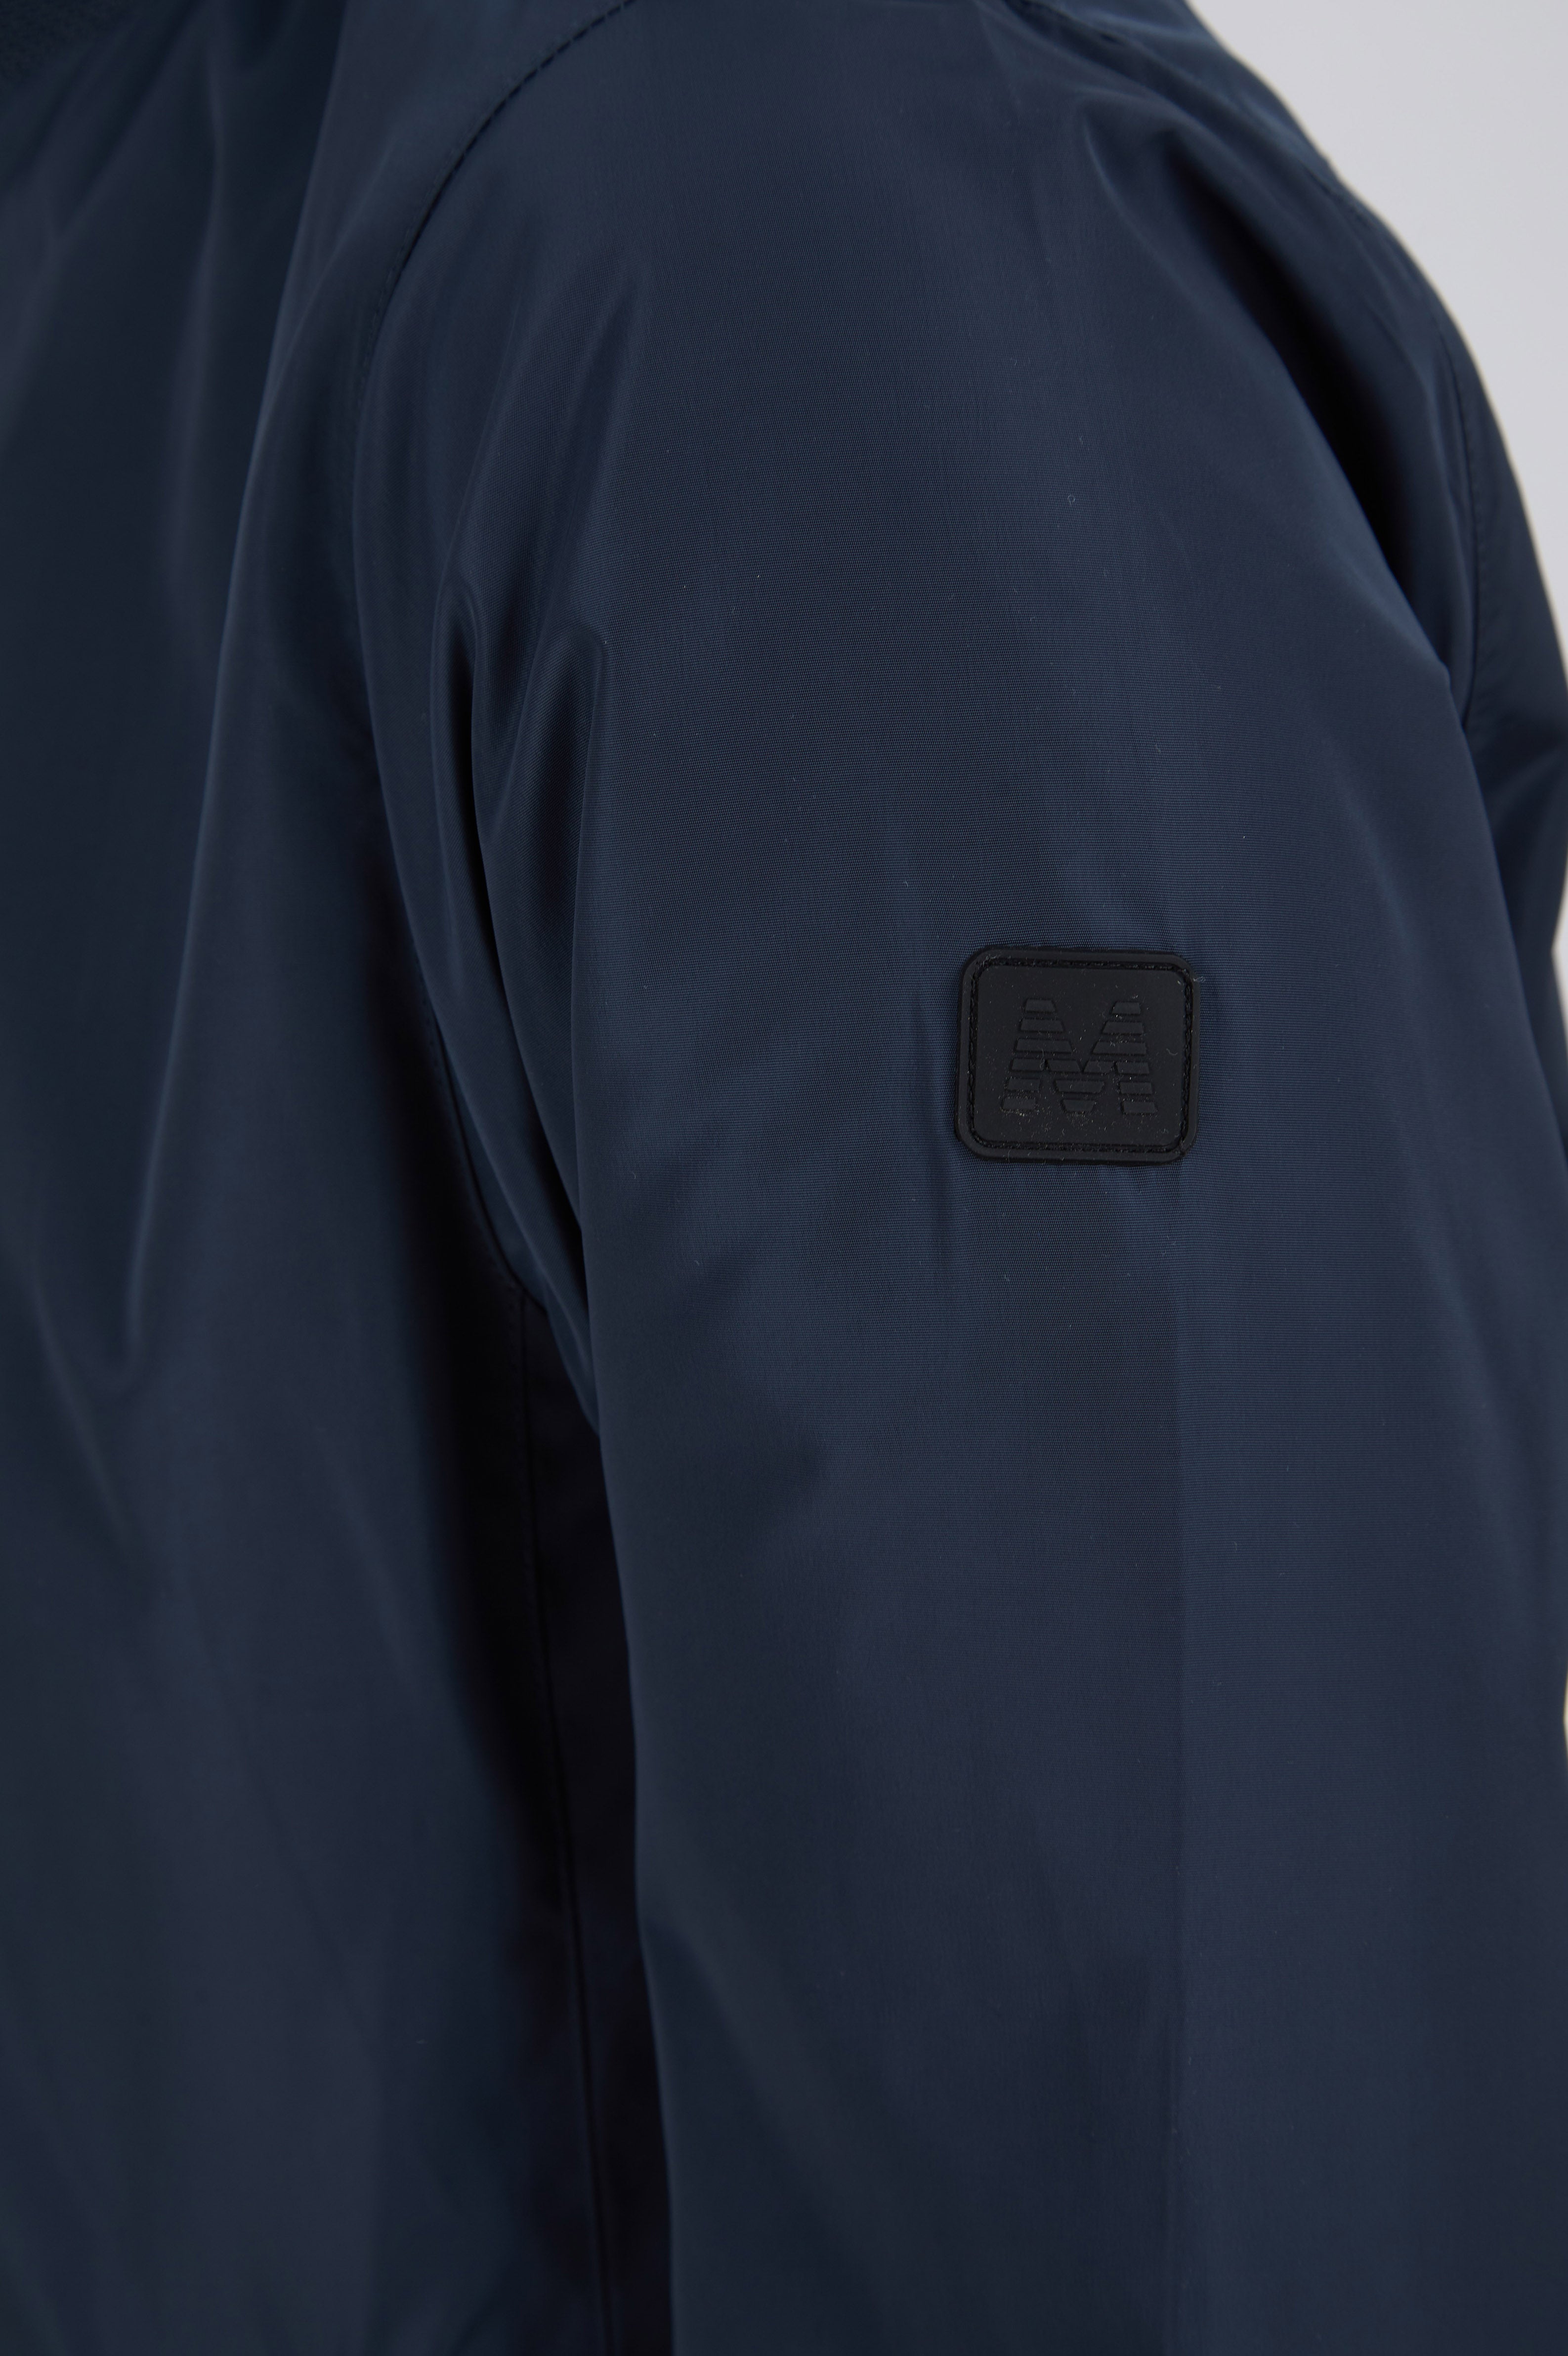 Load image into Gallery viewer, Matinique Hardron Jacket Navy
